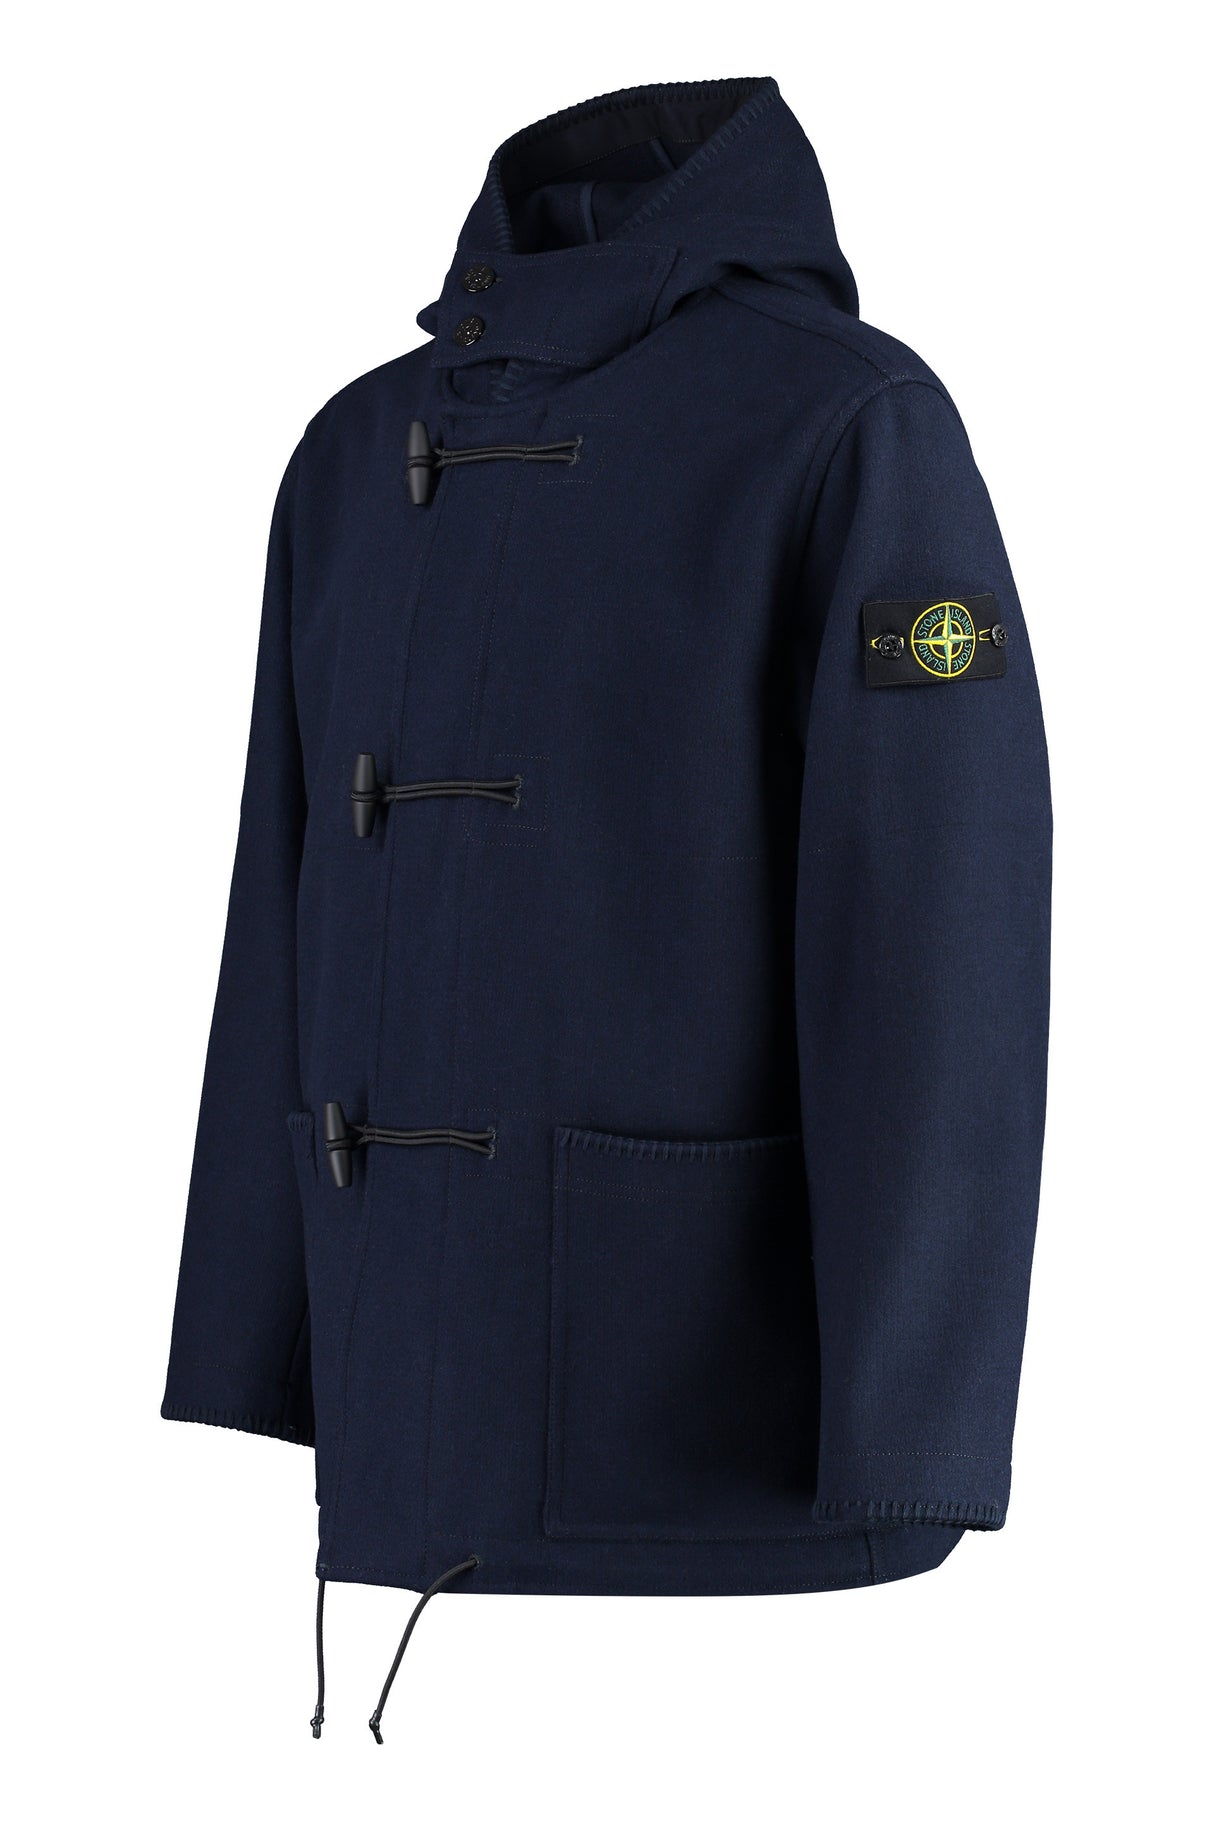 STONE ISLAND Navy Wool Blend Jacket with Removable Logo Patch for Men